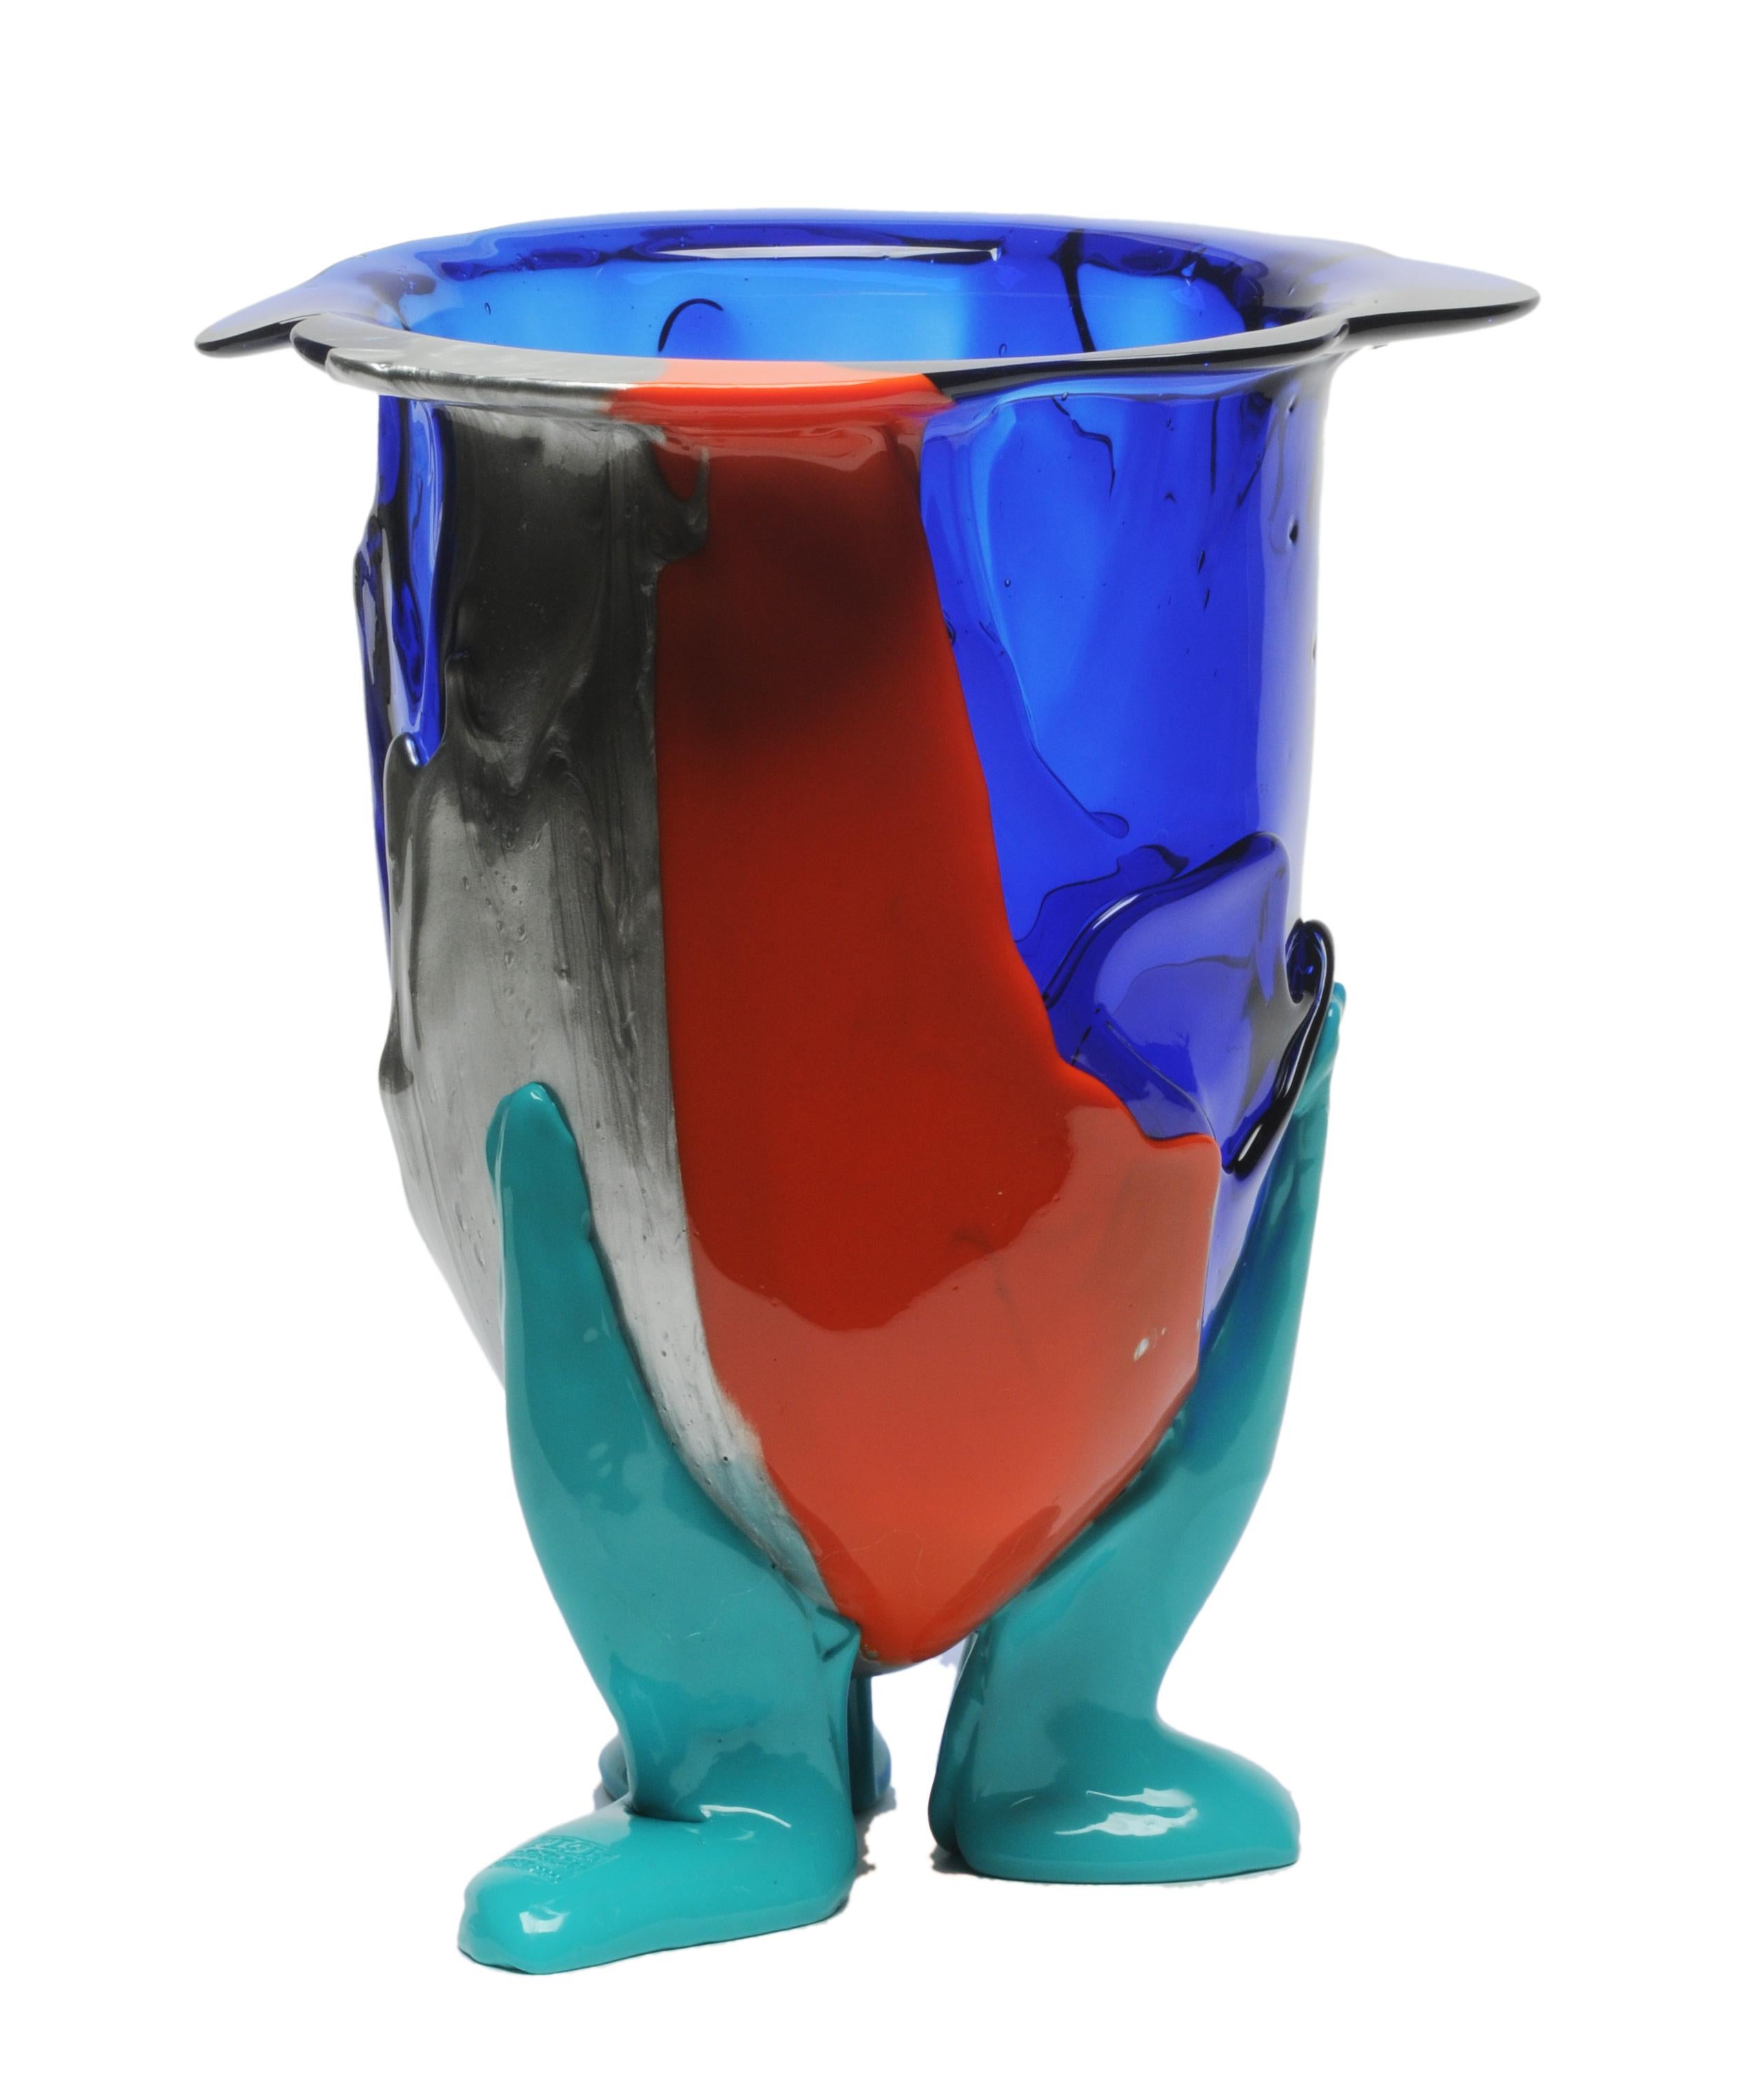 Clear extra colour vase - clear blue, matt red, matt turquoise, silver.

Vase in soft resin designed by Gaetano Pesce in 1995 for Fish Design collection.

Measures: M - ø 16cm x H 26cm
Colours: clear blue, matt red, matt turquoise,